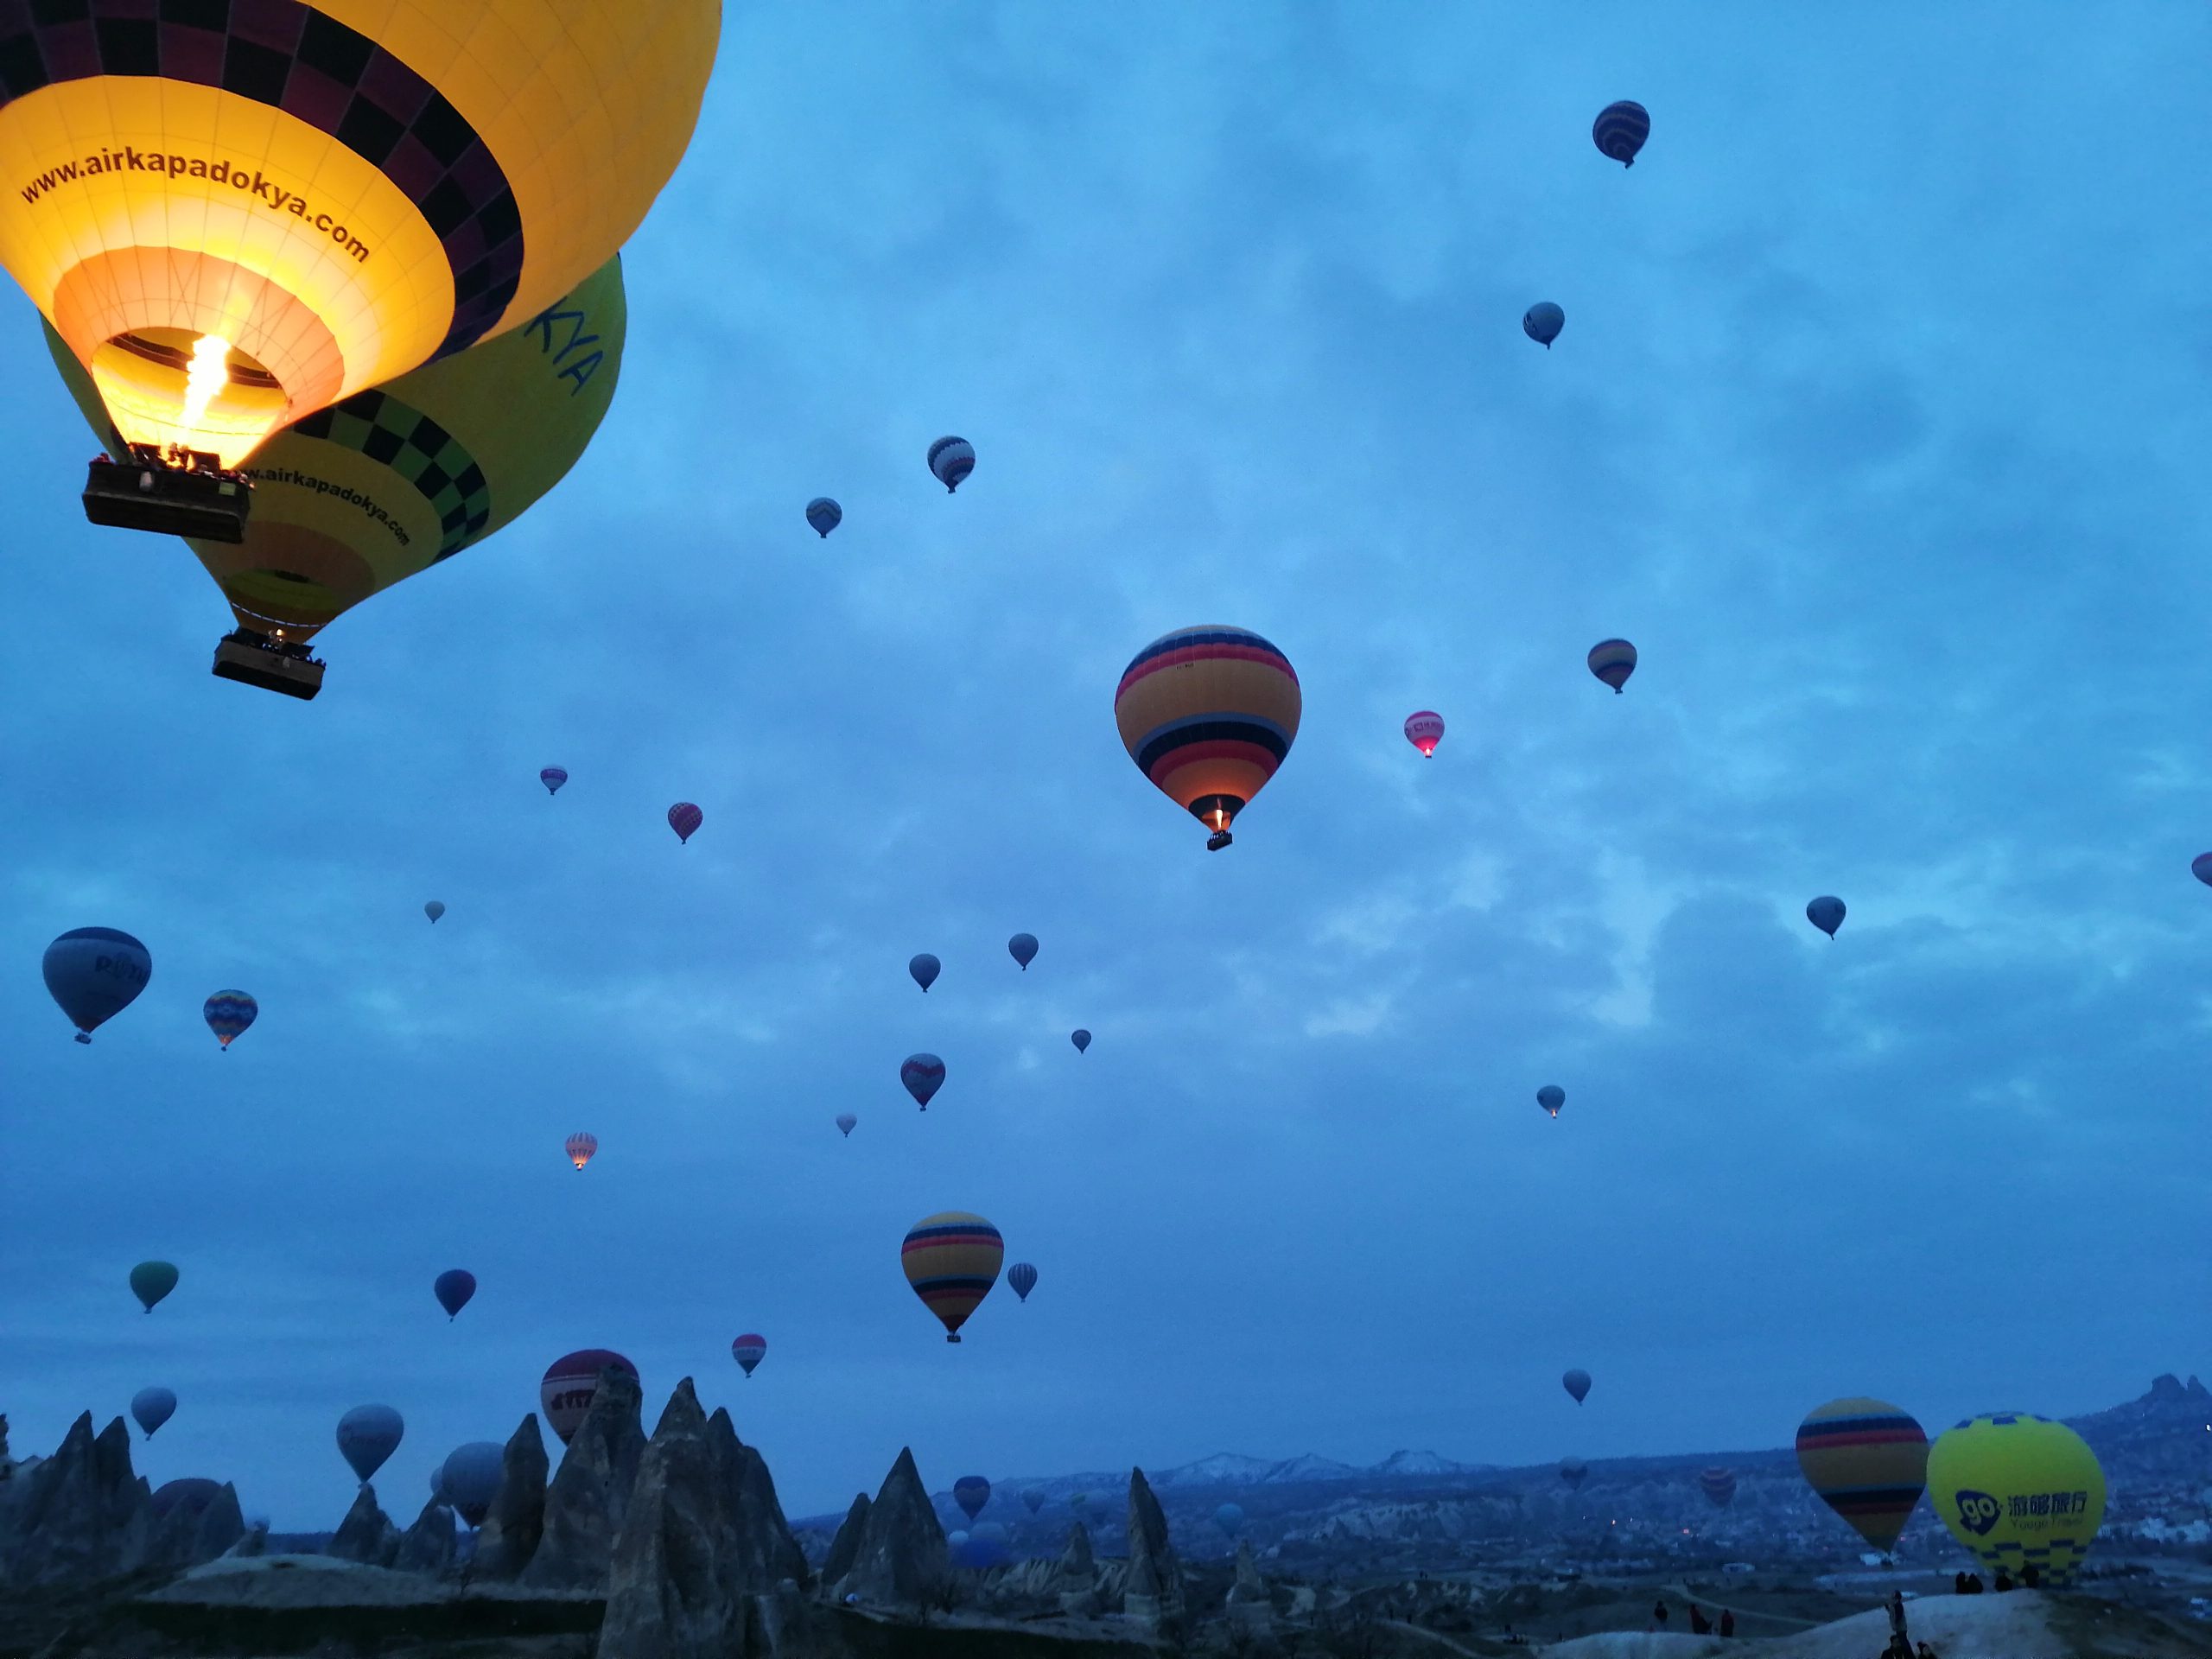 A photograph shows about thirty colorful hot air balloons in the air at various distances against a blue twilight sky.